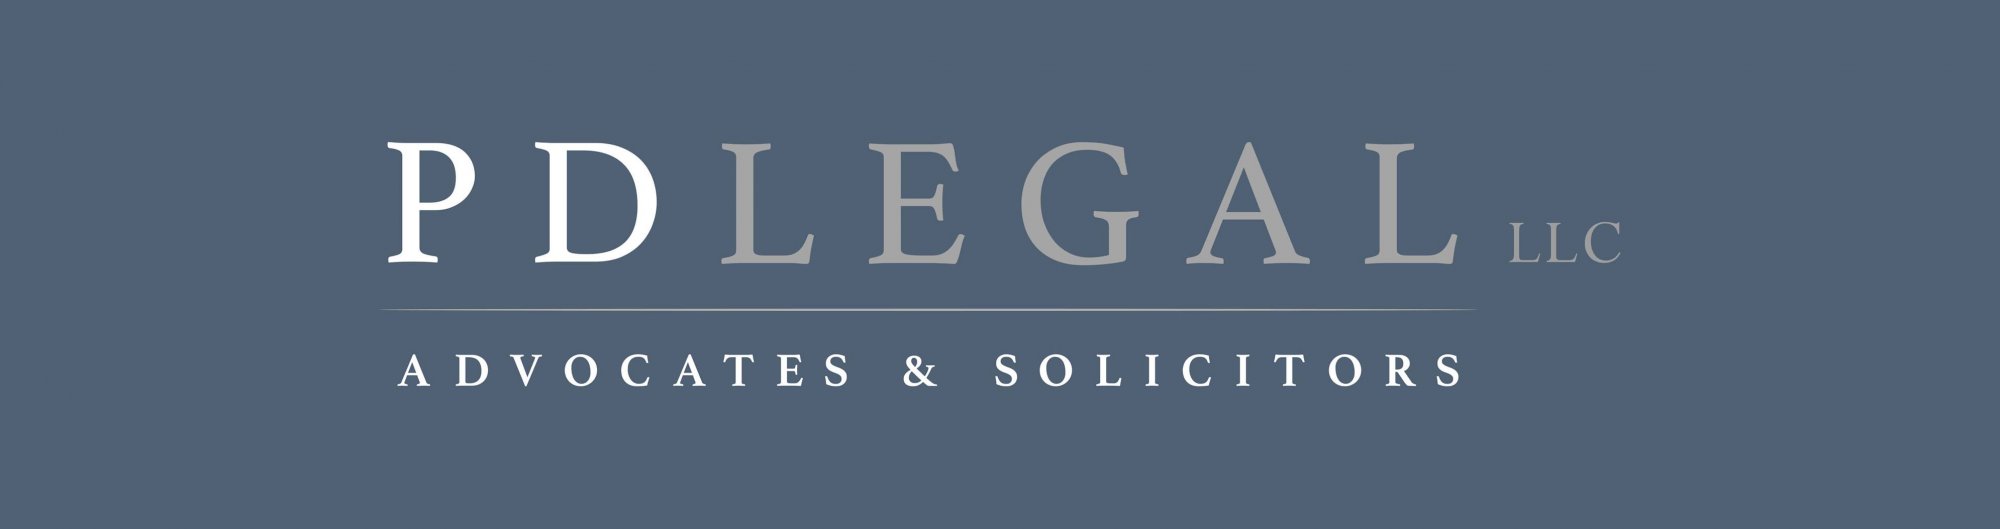 PDLegal LLC Advocates & Solicitors cover photo